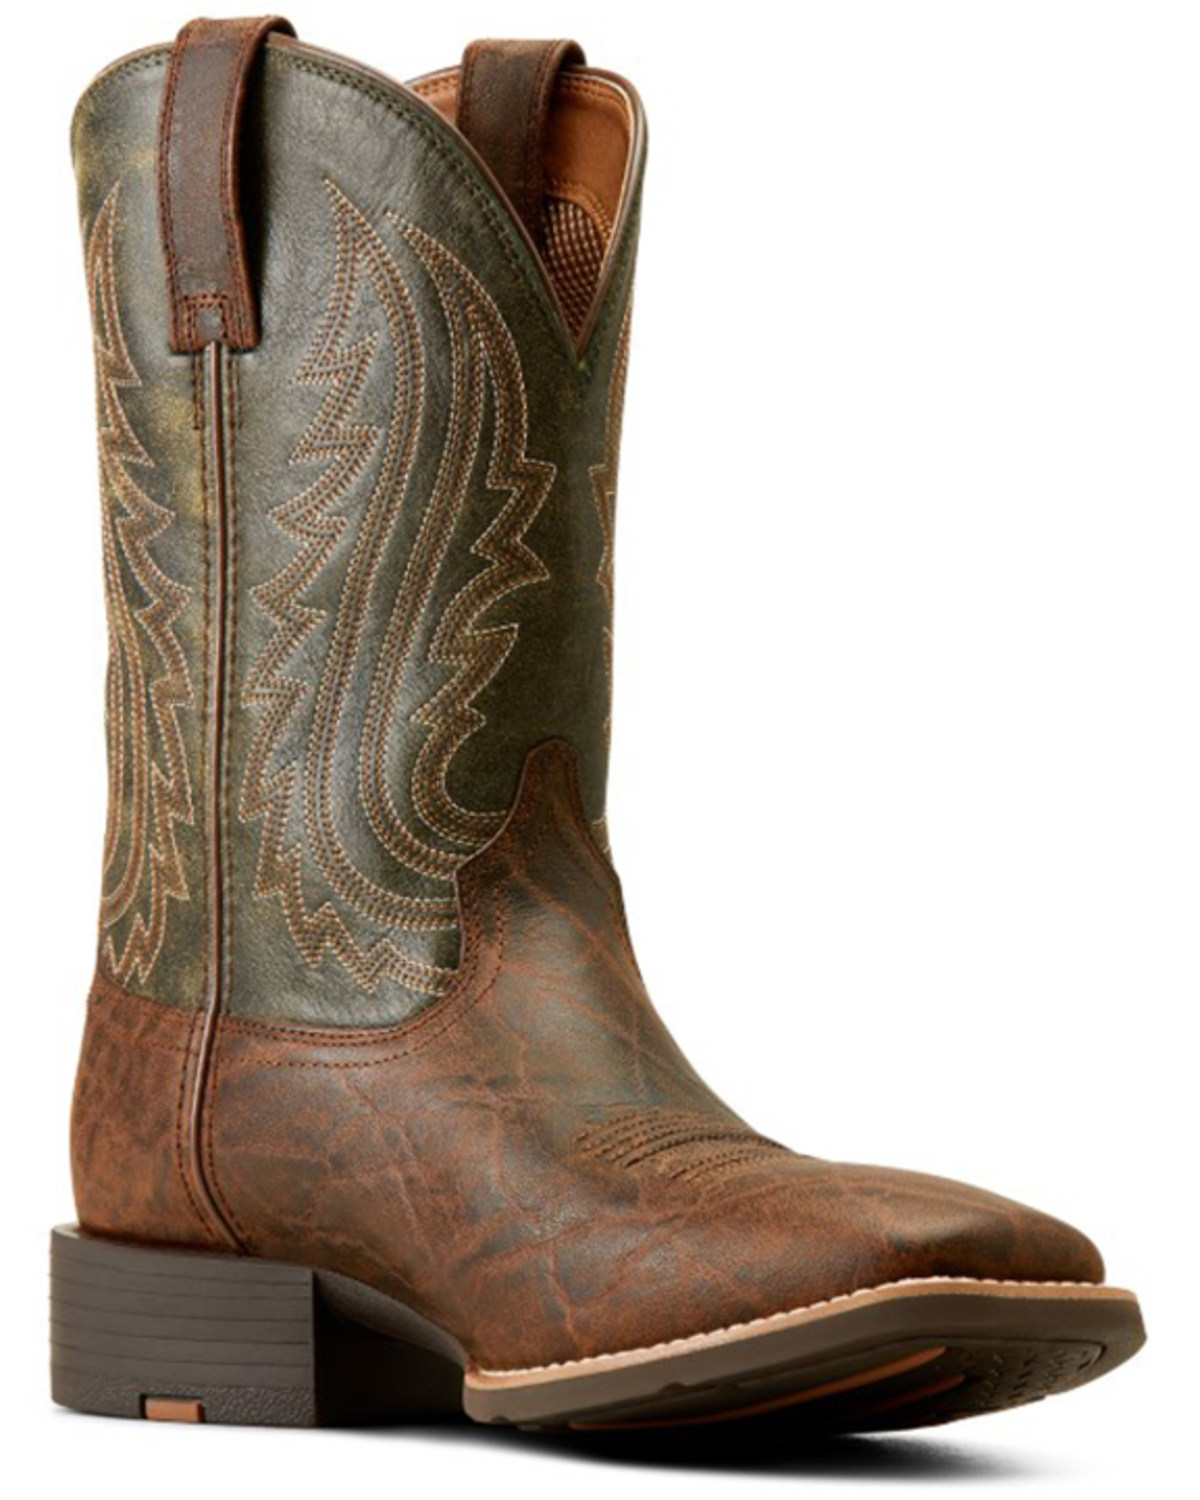 Ariat Men's Sport Big Country Performance Western Boots - Broad Square Toe